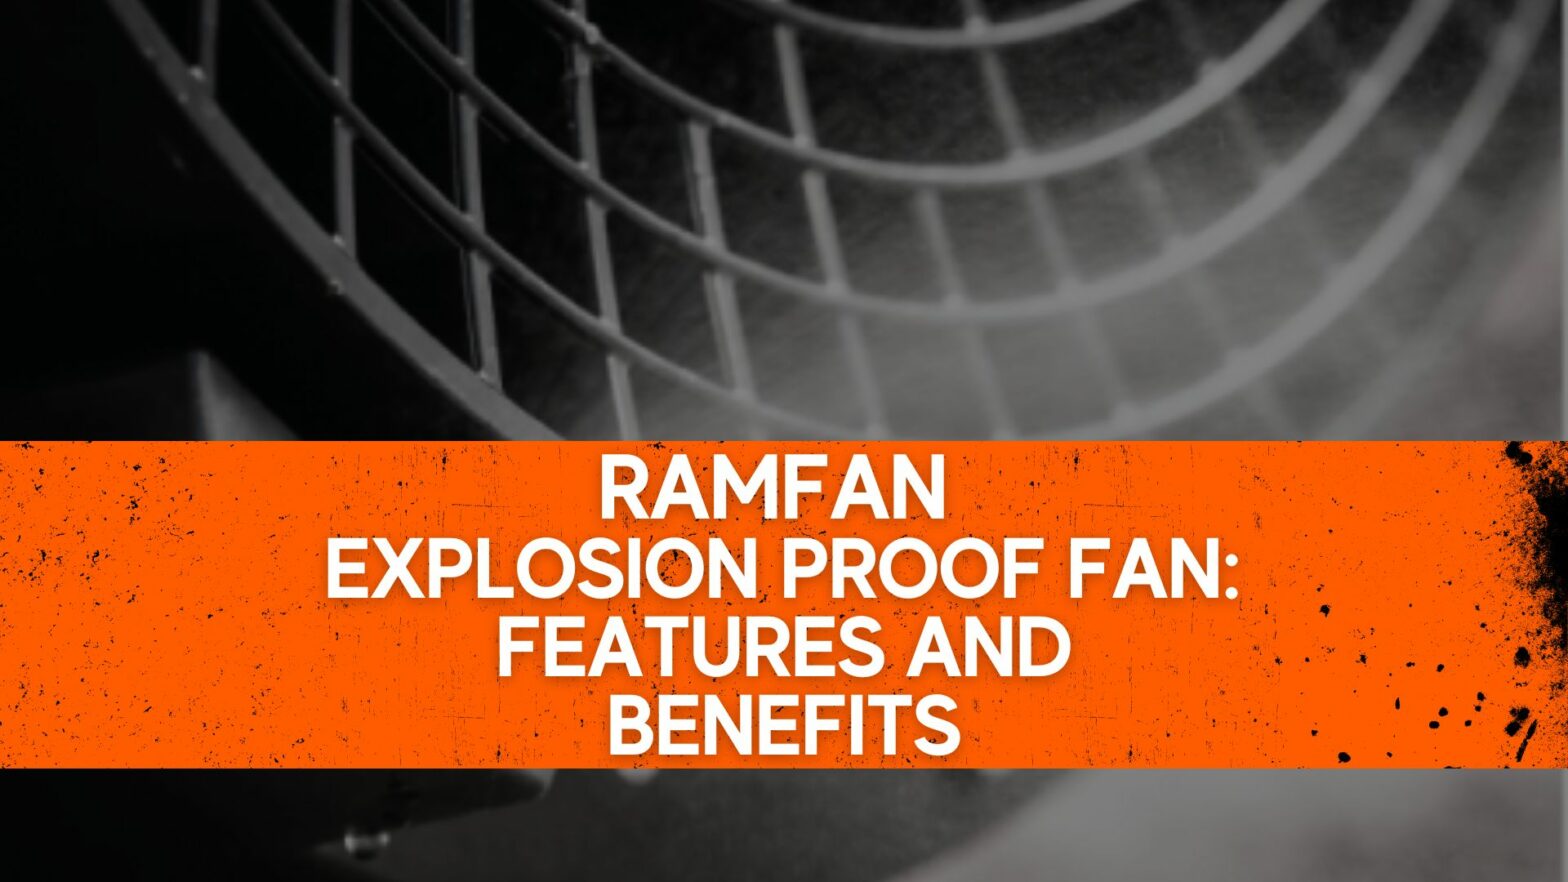 RamFan Explosion Proof Fan Features and Benefits